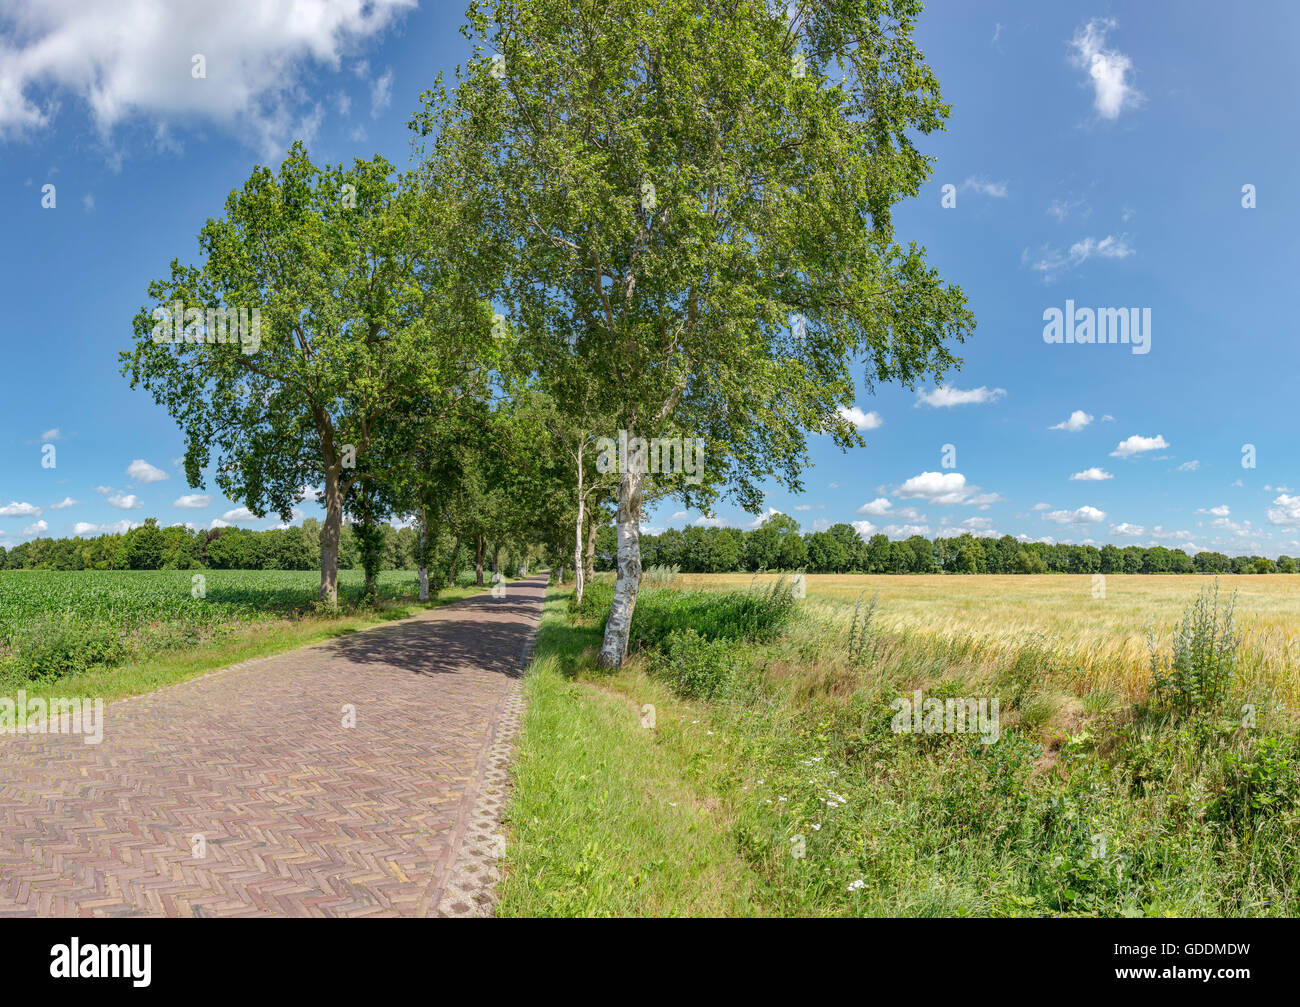 Langelo,Drenthe,Brick paved road with trees on both sides along a cornfield Stock Photo